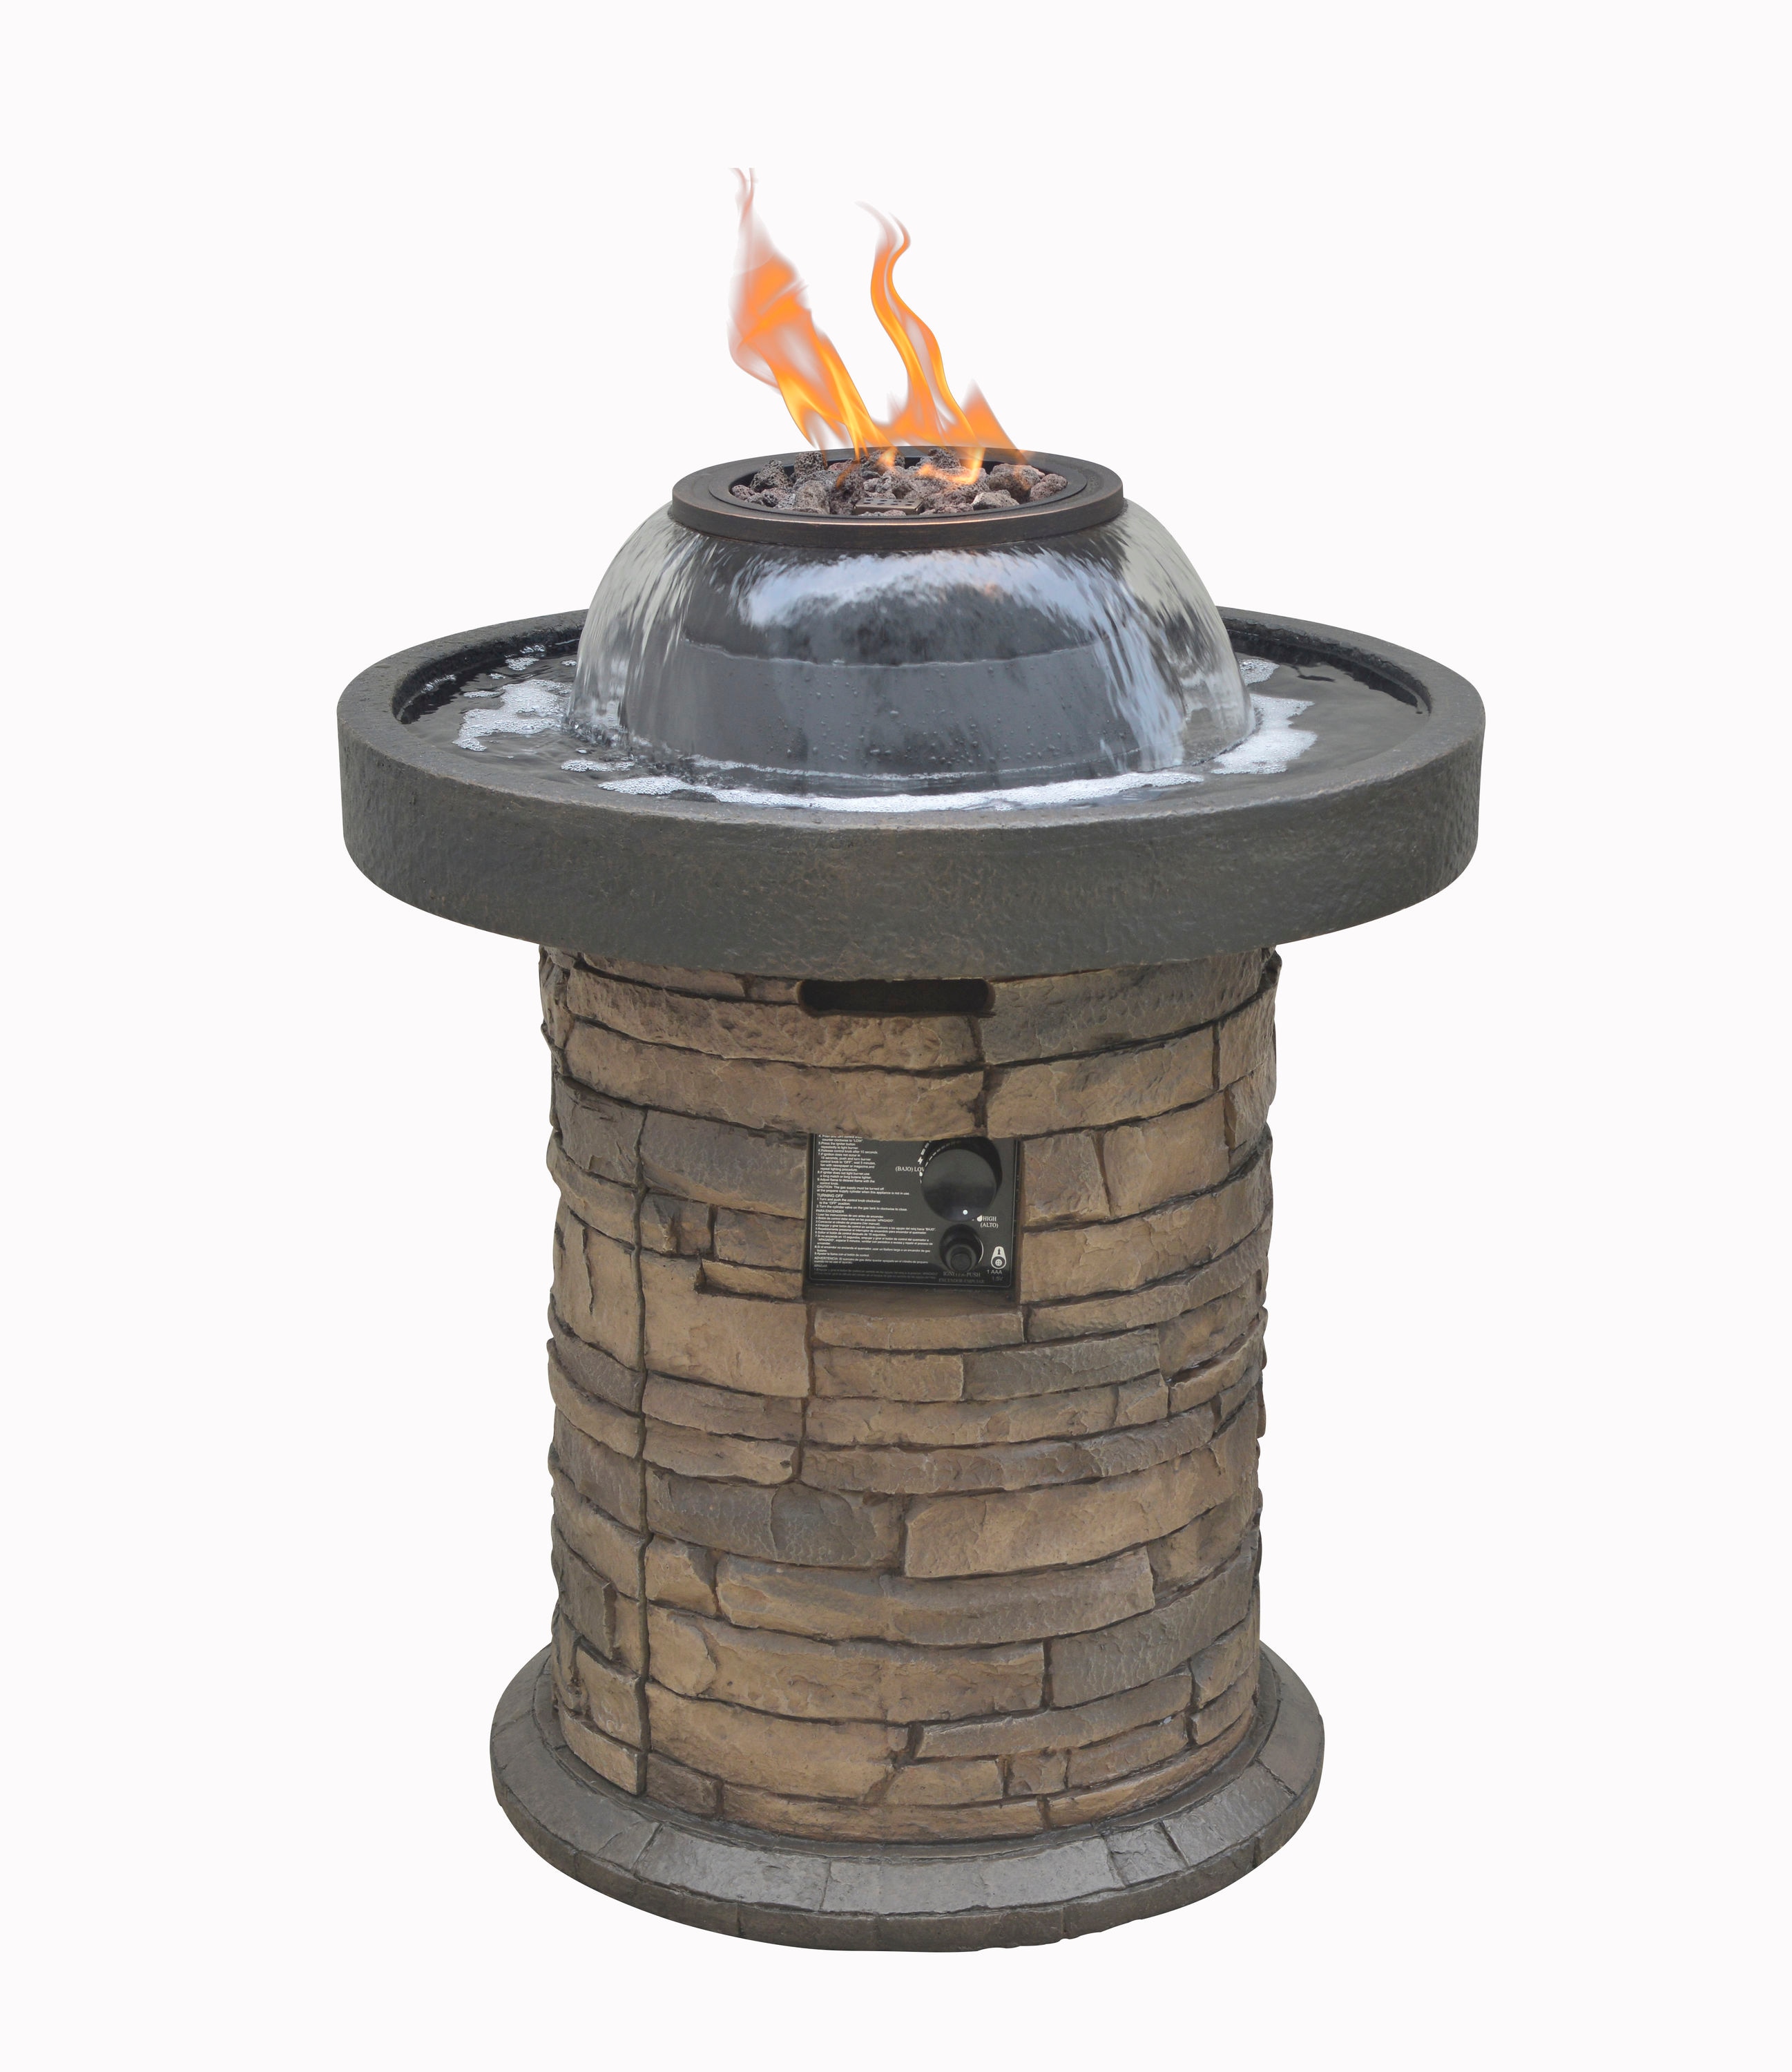 H Resin Rock Fountain Outdoor, Fire Pit With Water Fountain